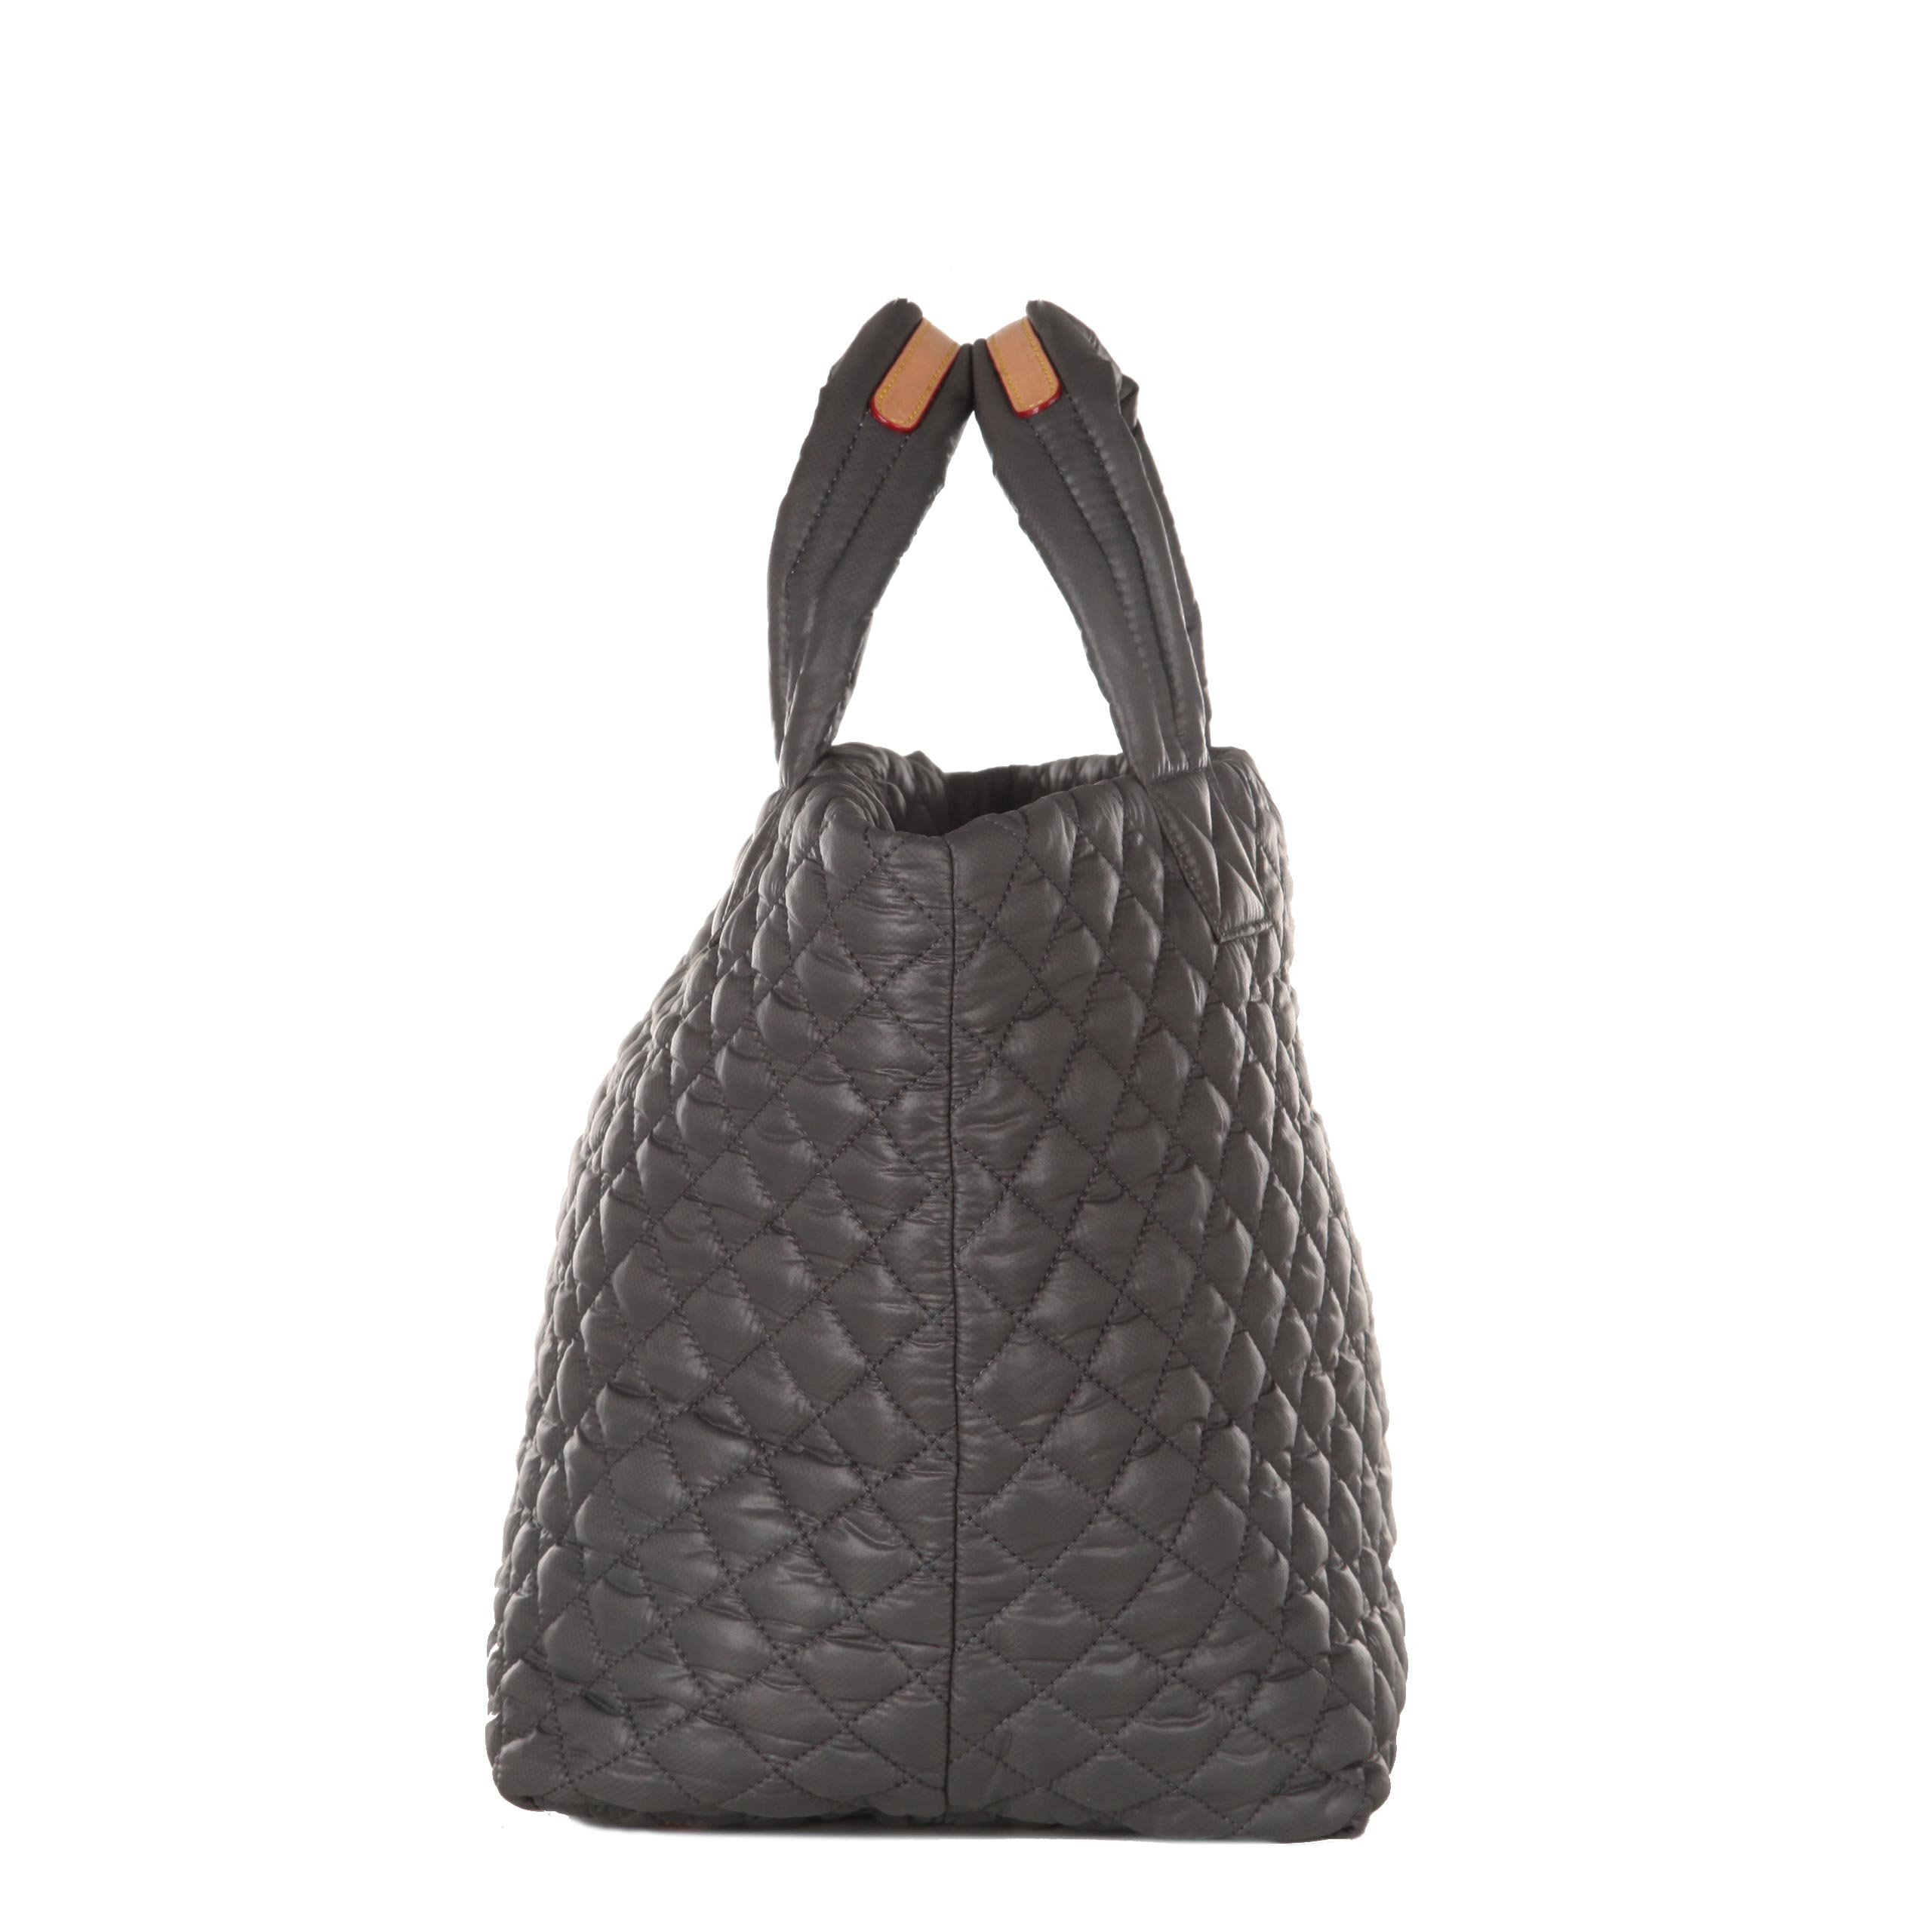 mz wallace small tote